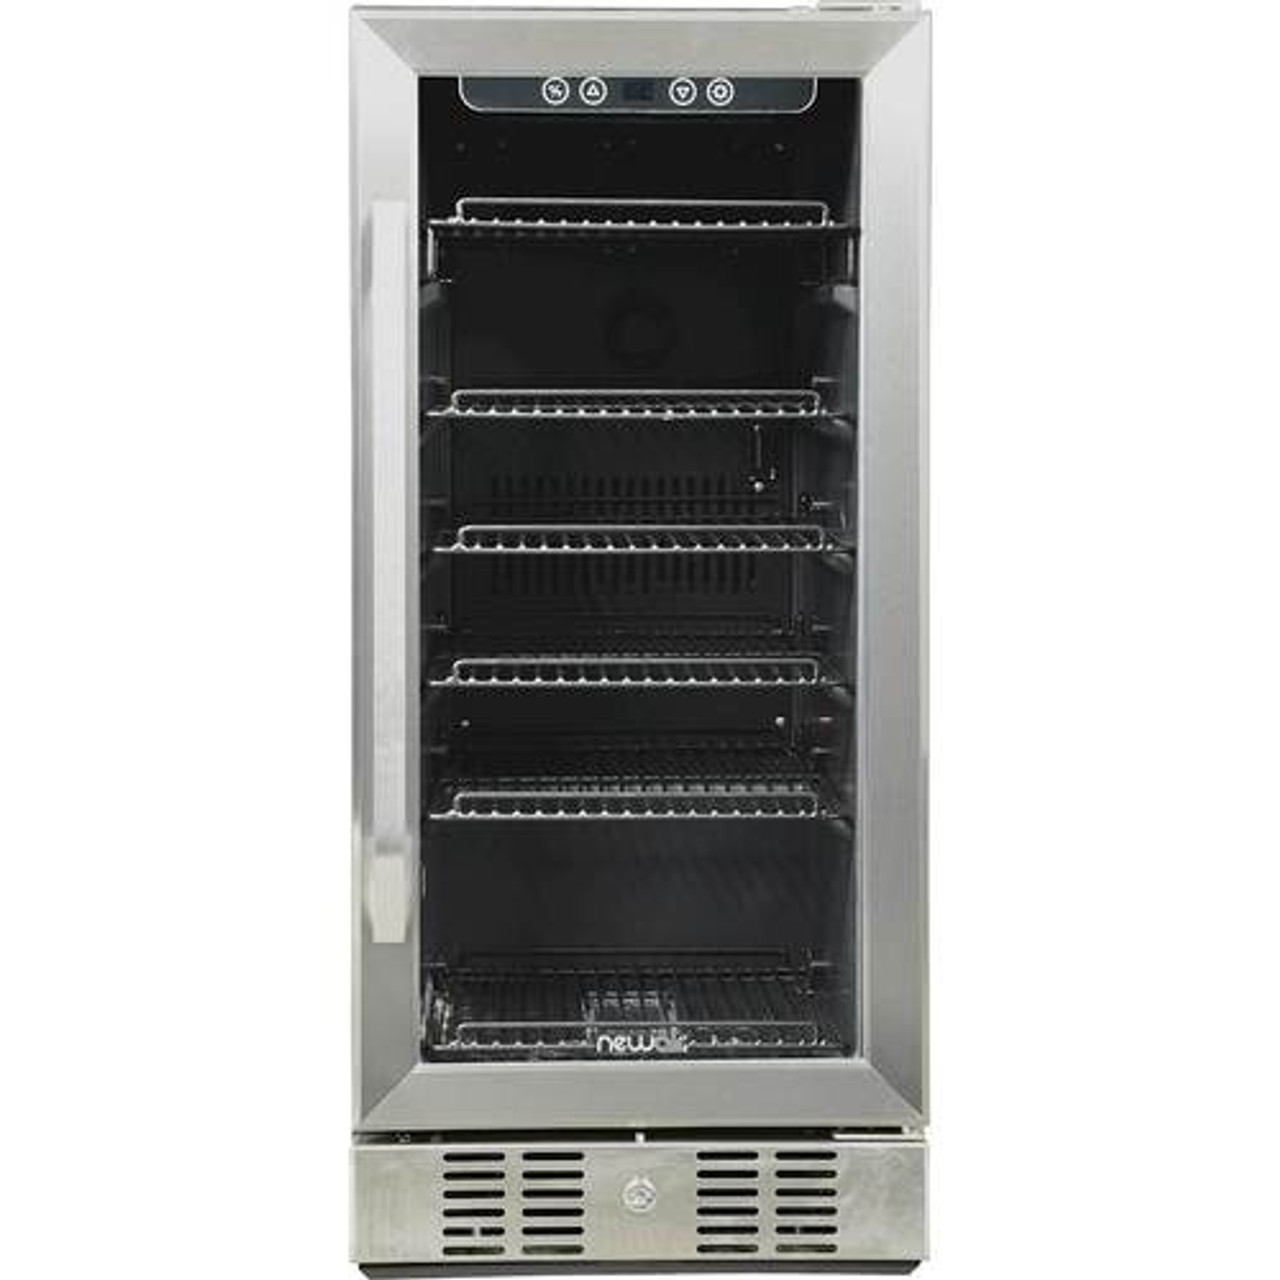 NewAir - 96-Can Built-In Beverage Cooler - Stainless steel